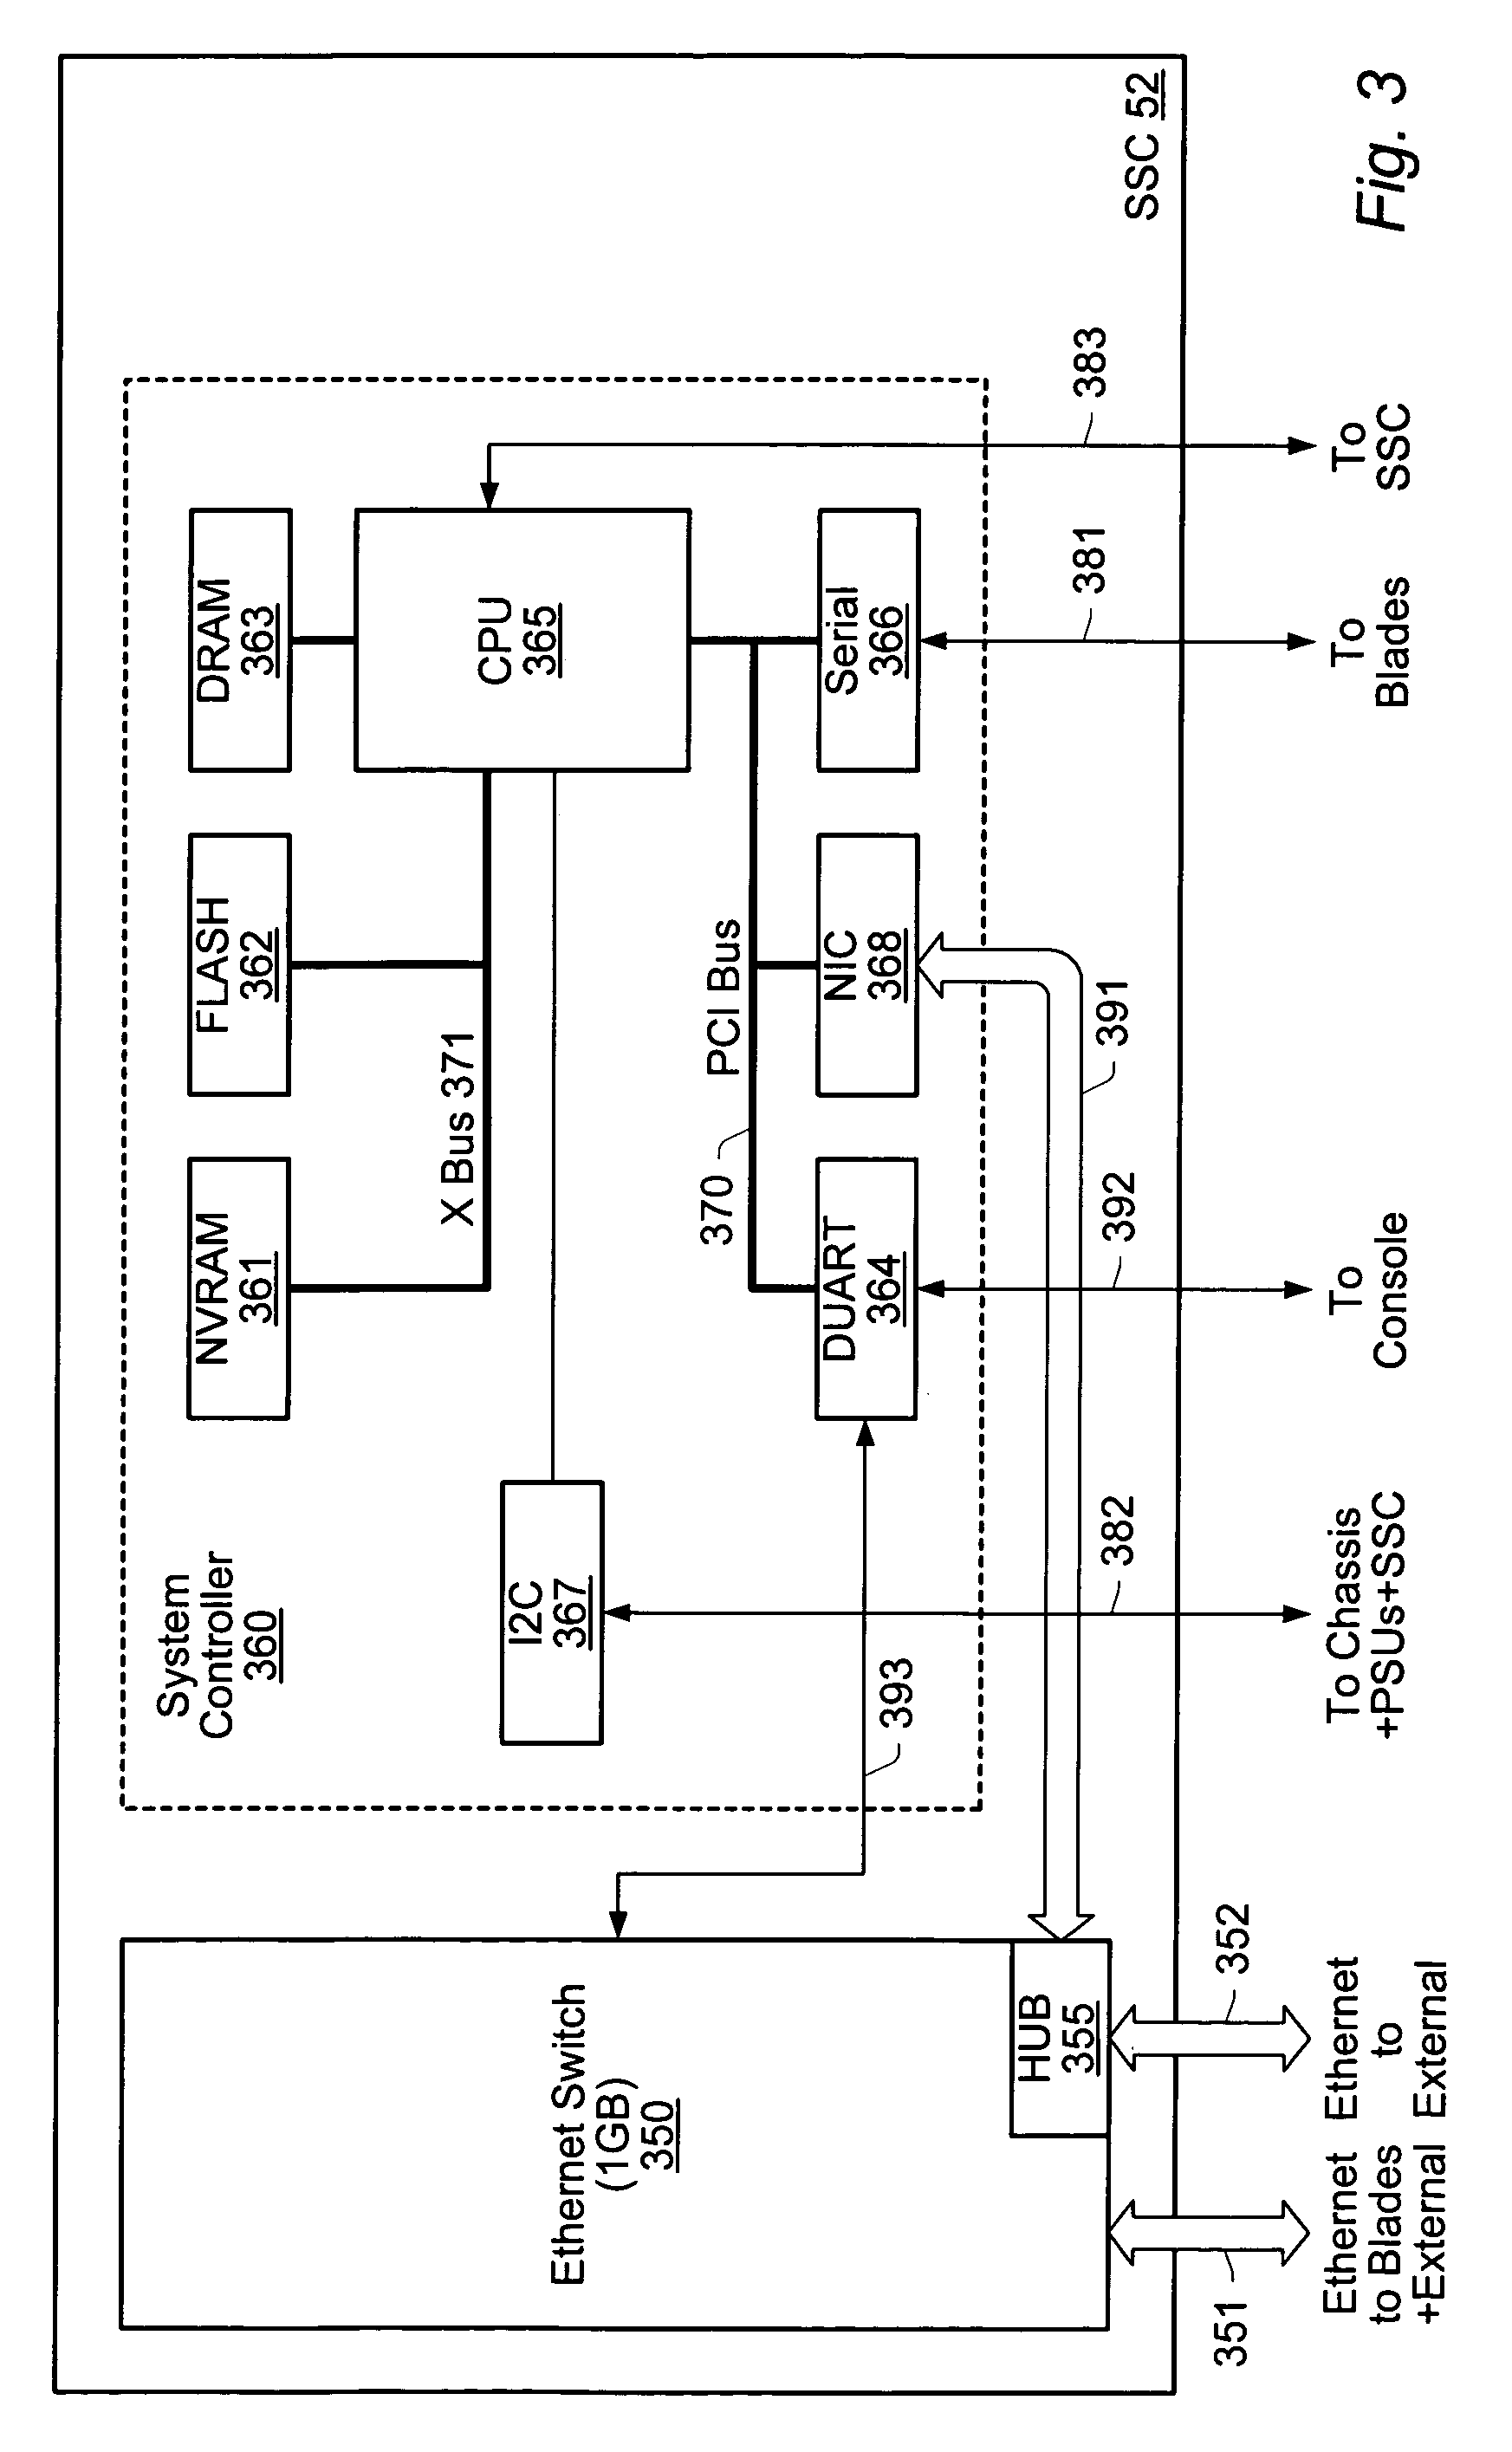 Method and apparatus for performing configuration over a network